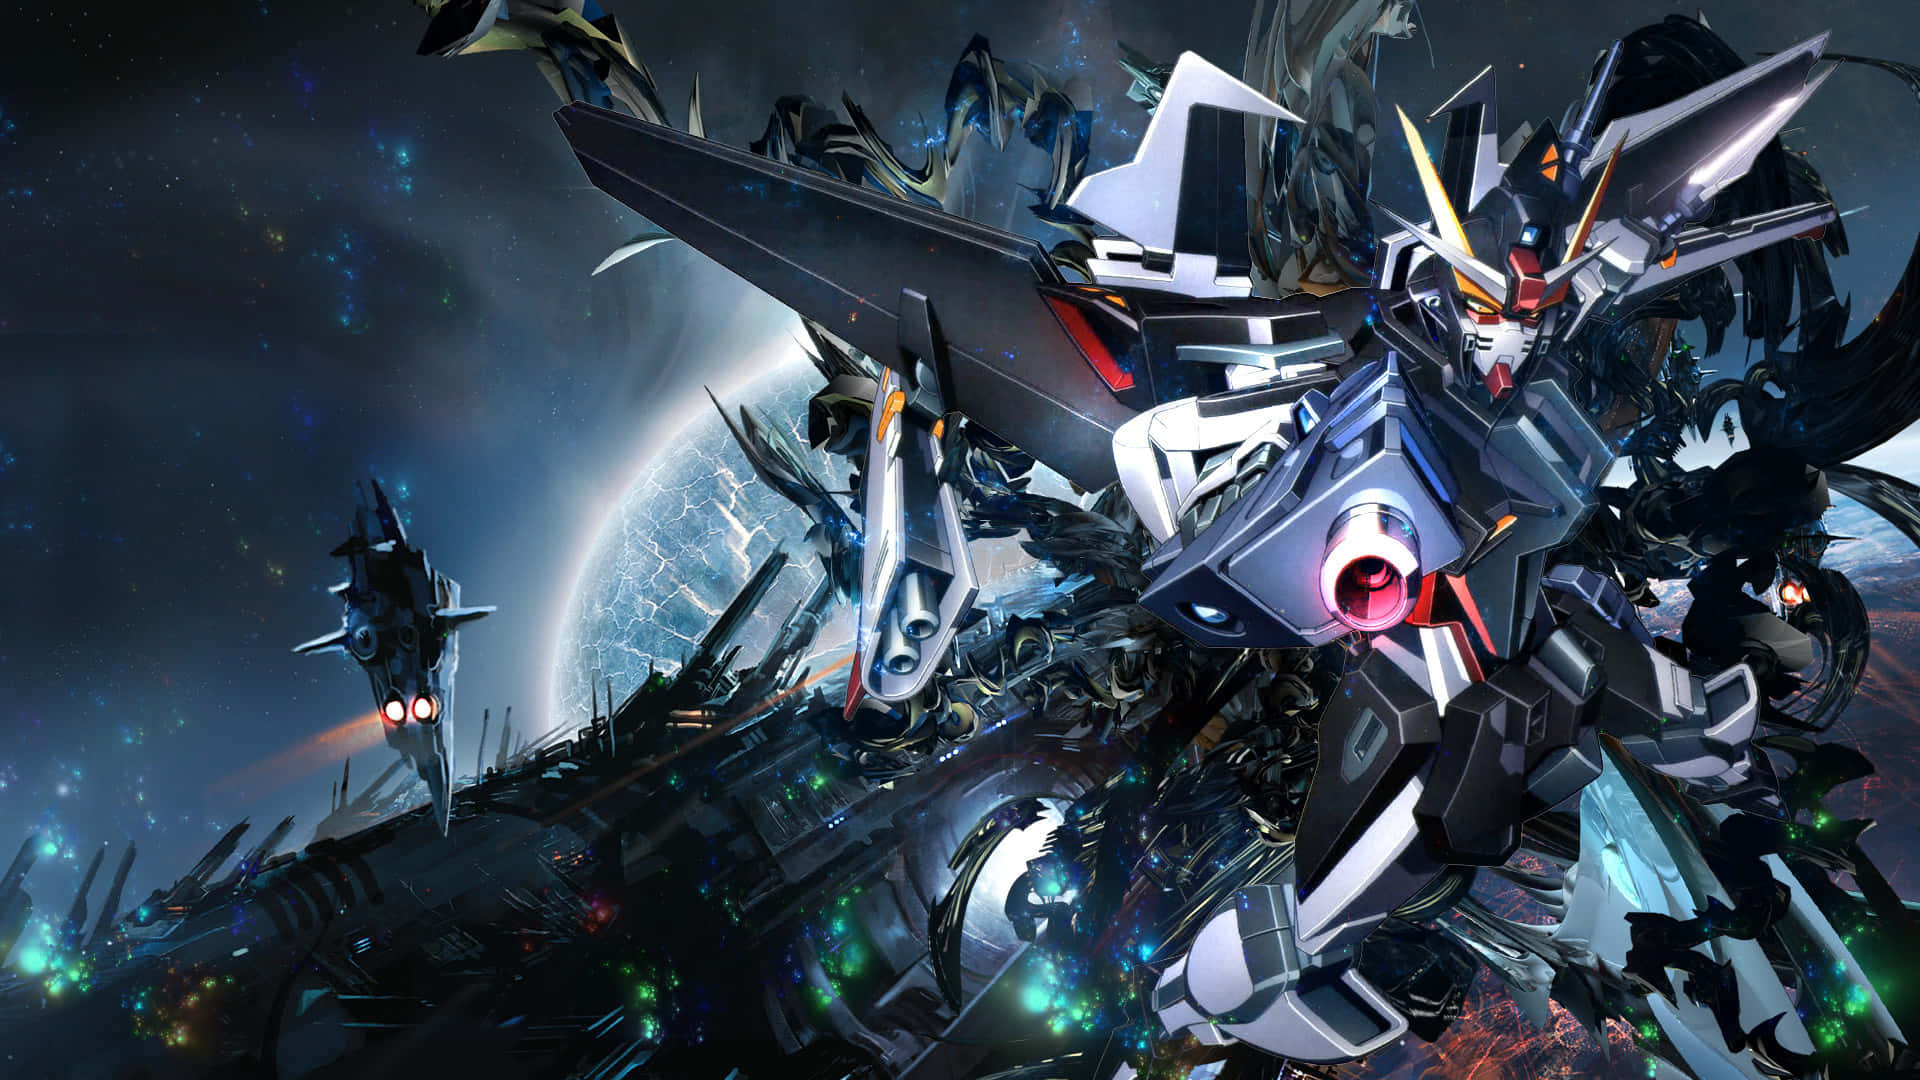 Relive the passion of Gundam Wing with this striking image Wallpaper